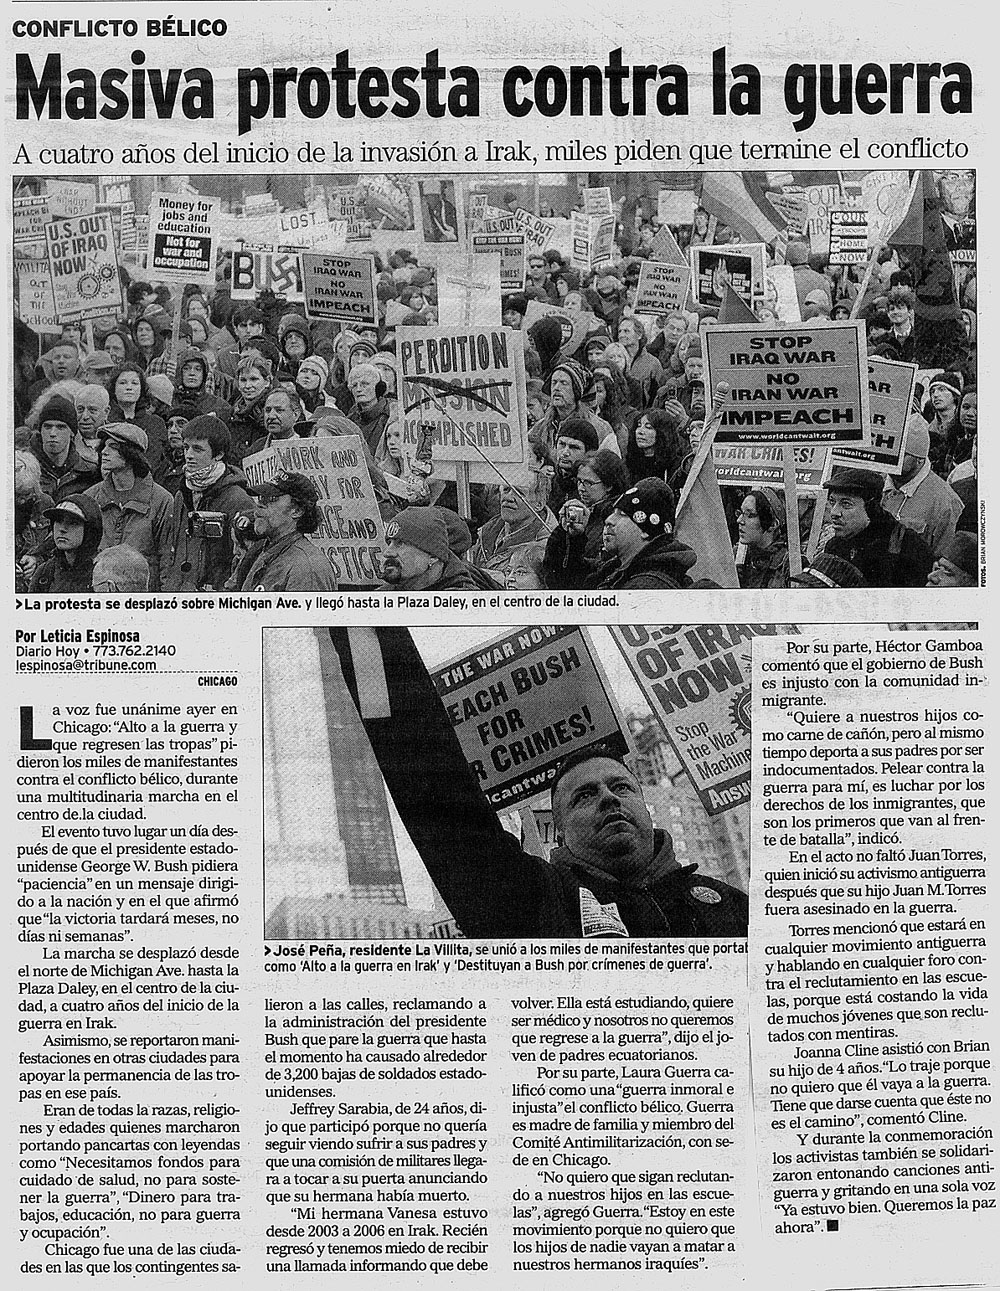 Chicago antiwar news in Spanish on chicagosee.com